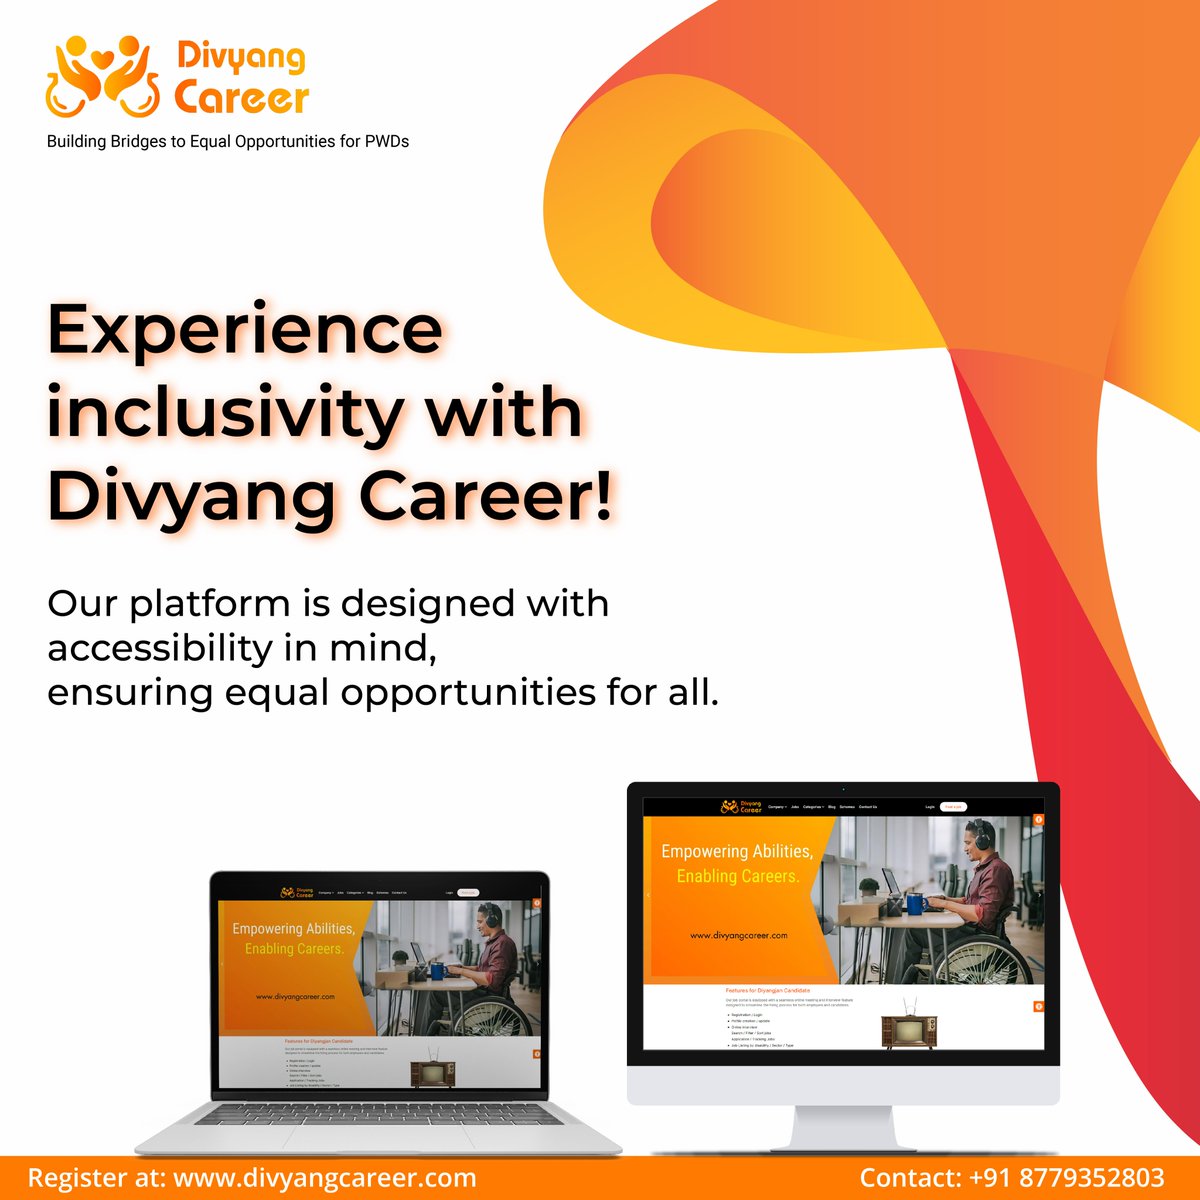 Your journey towards a fulfilling career begins with Divyang Career. Our platform offers opportunities tailored to your unique strengths where everyone deserves a chance to succeed. 
#pwdjobs #empowercarrer #pwd #onlinejobs #careerjobs #jobseekers #jobseekers  #PWD #divyangcareer